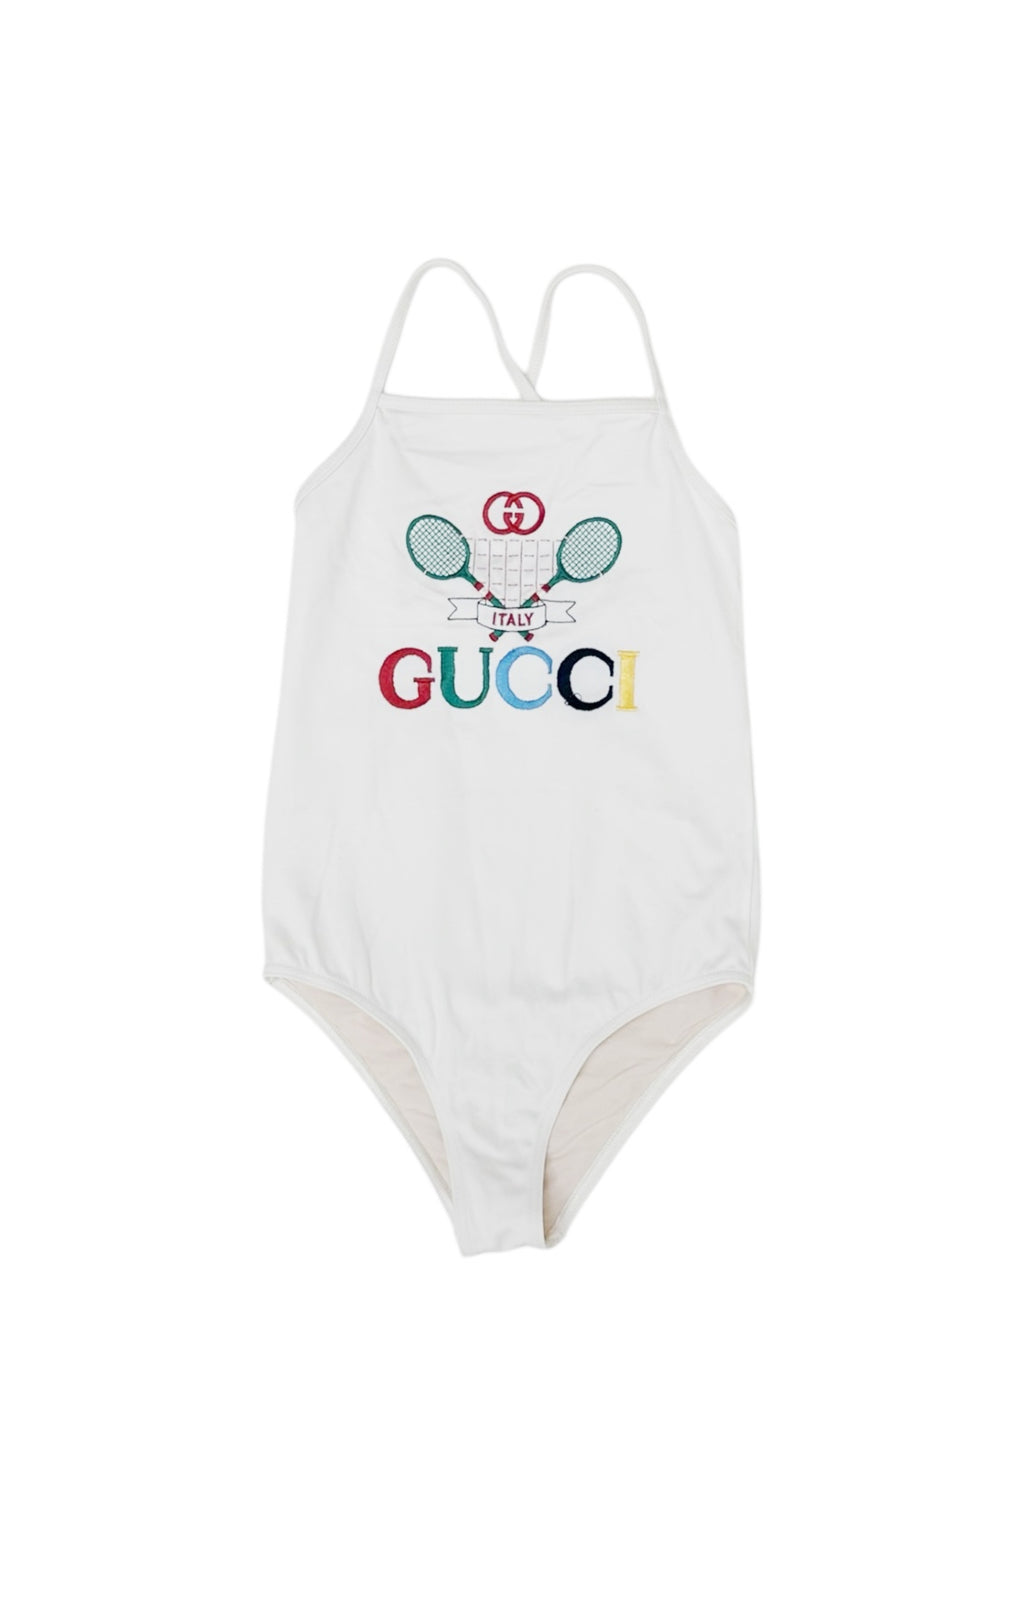 GUCCI (RARE) Swimsuit Size: No size tags, fits like 7-8 Years